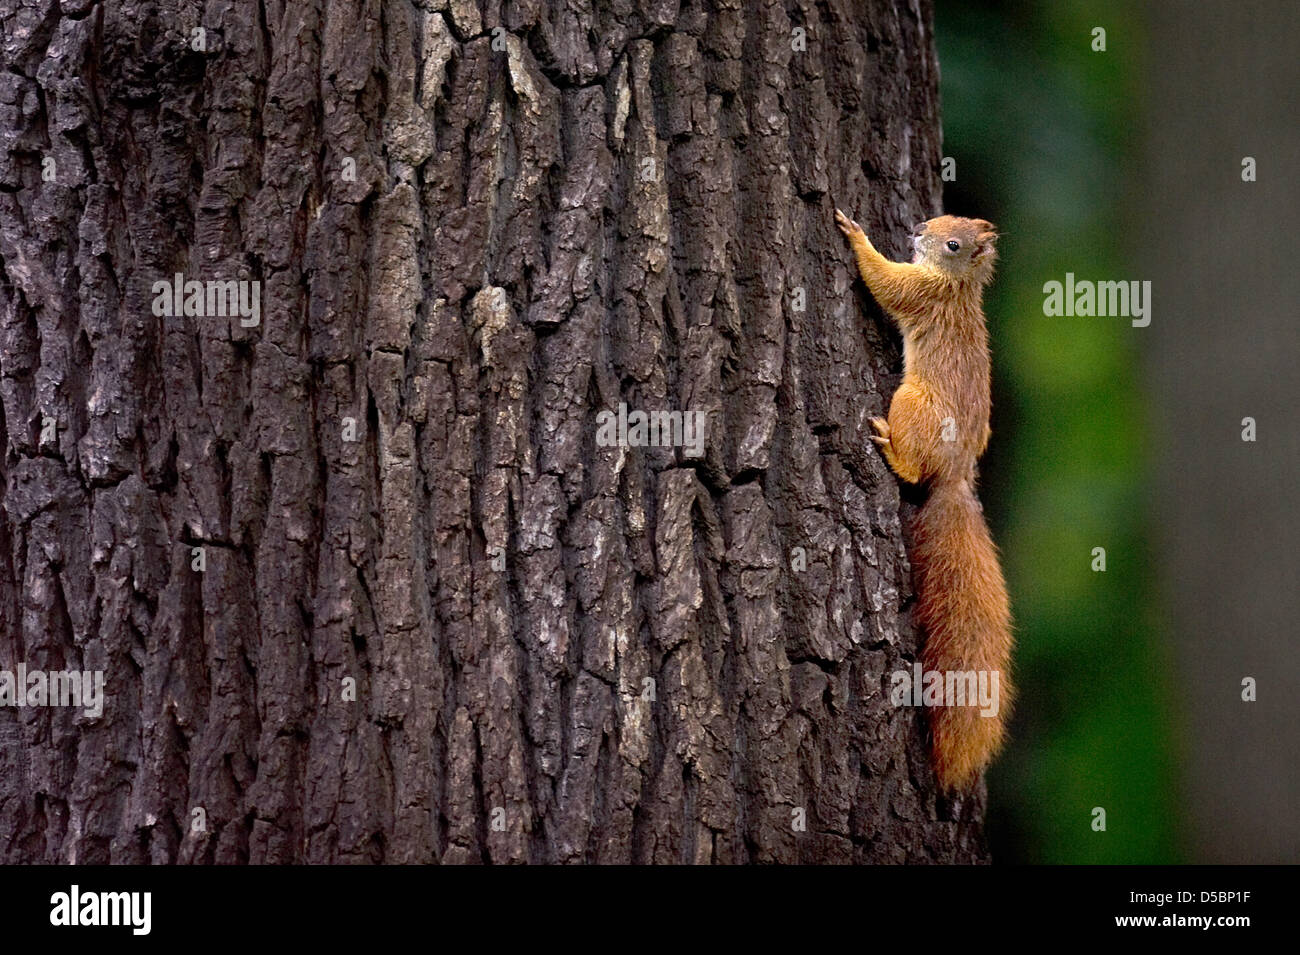 A squirrel climbs a tree in Dresden, Germany, 13 September 2010. Photo: Arno Burgi Stock Photo